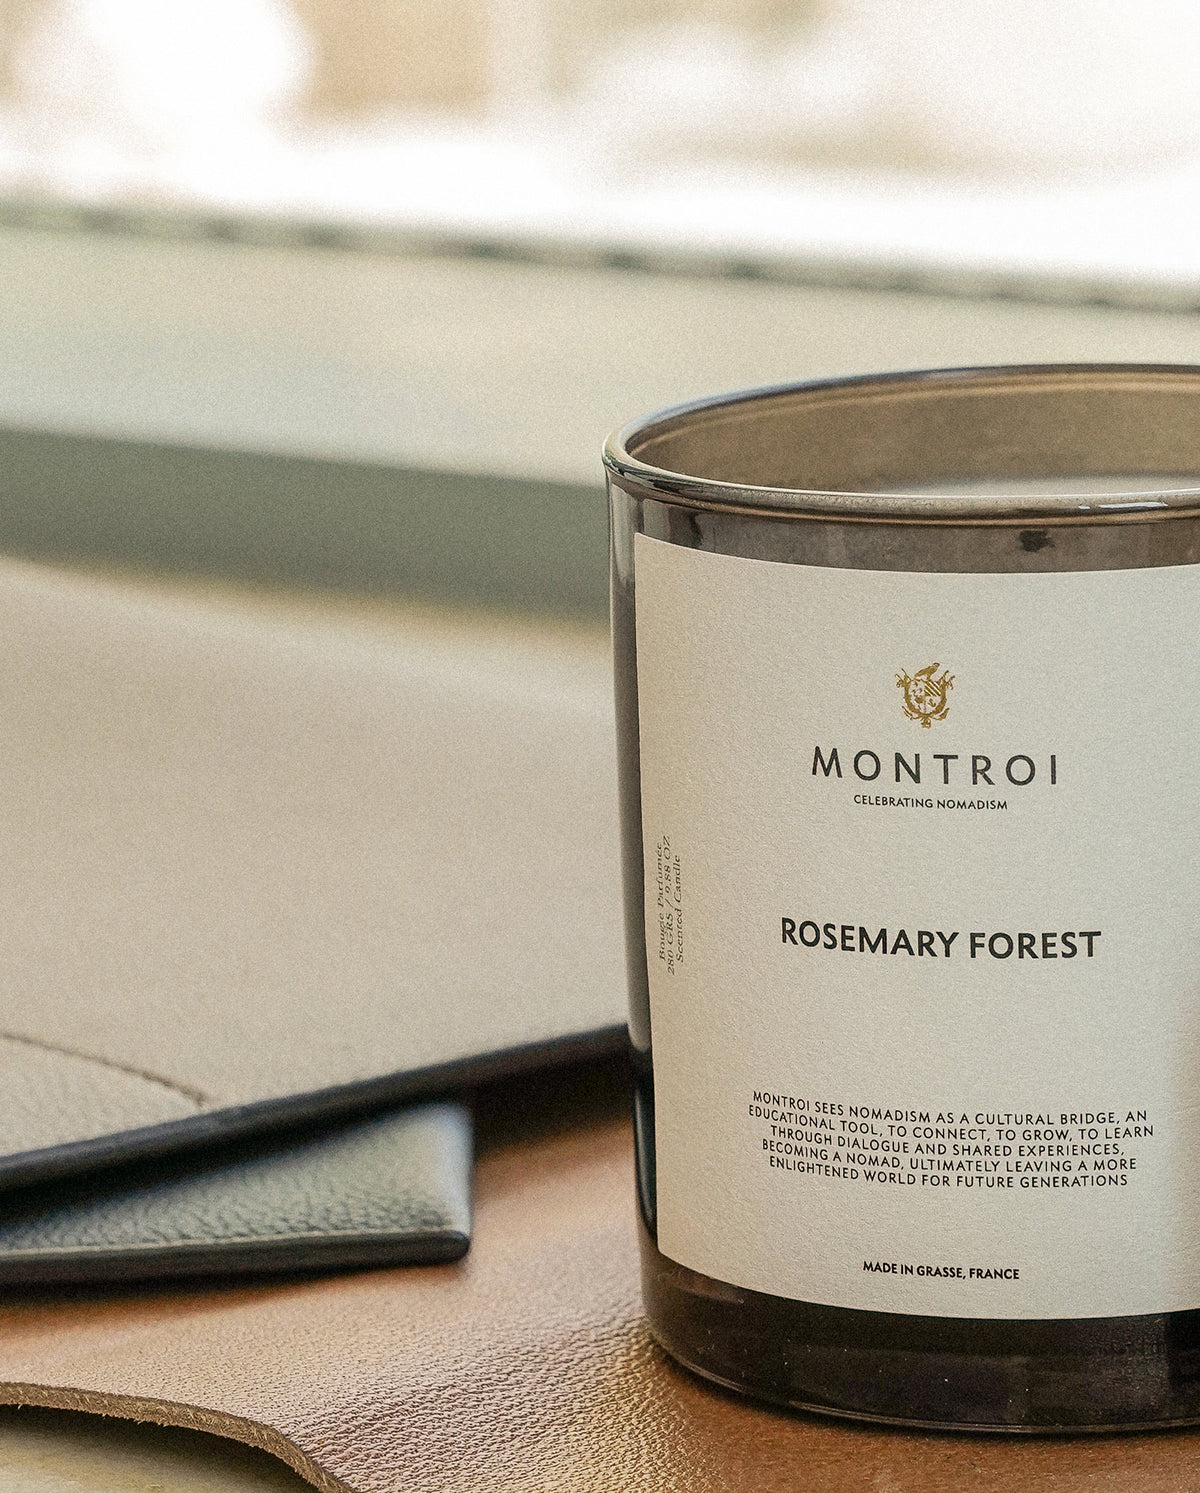 ROSEMARY FOREST CANDLE